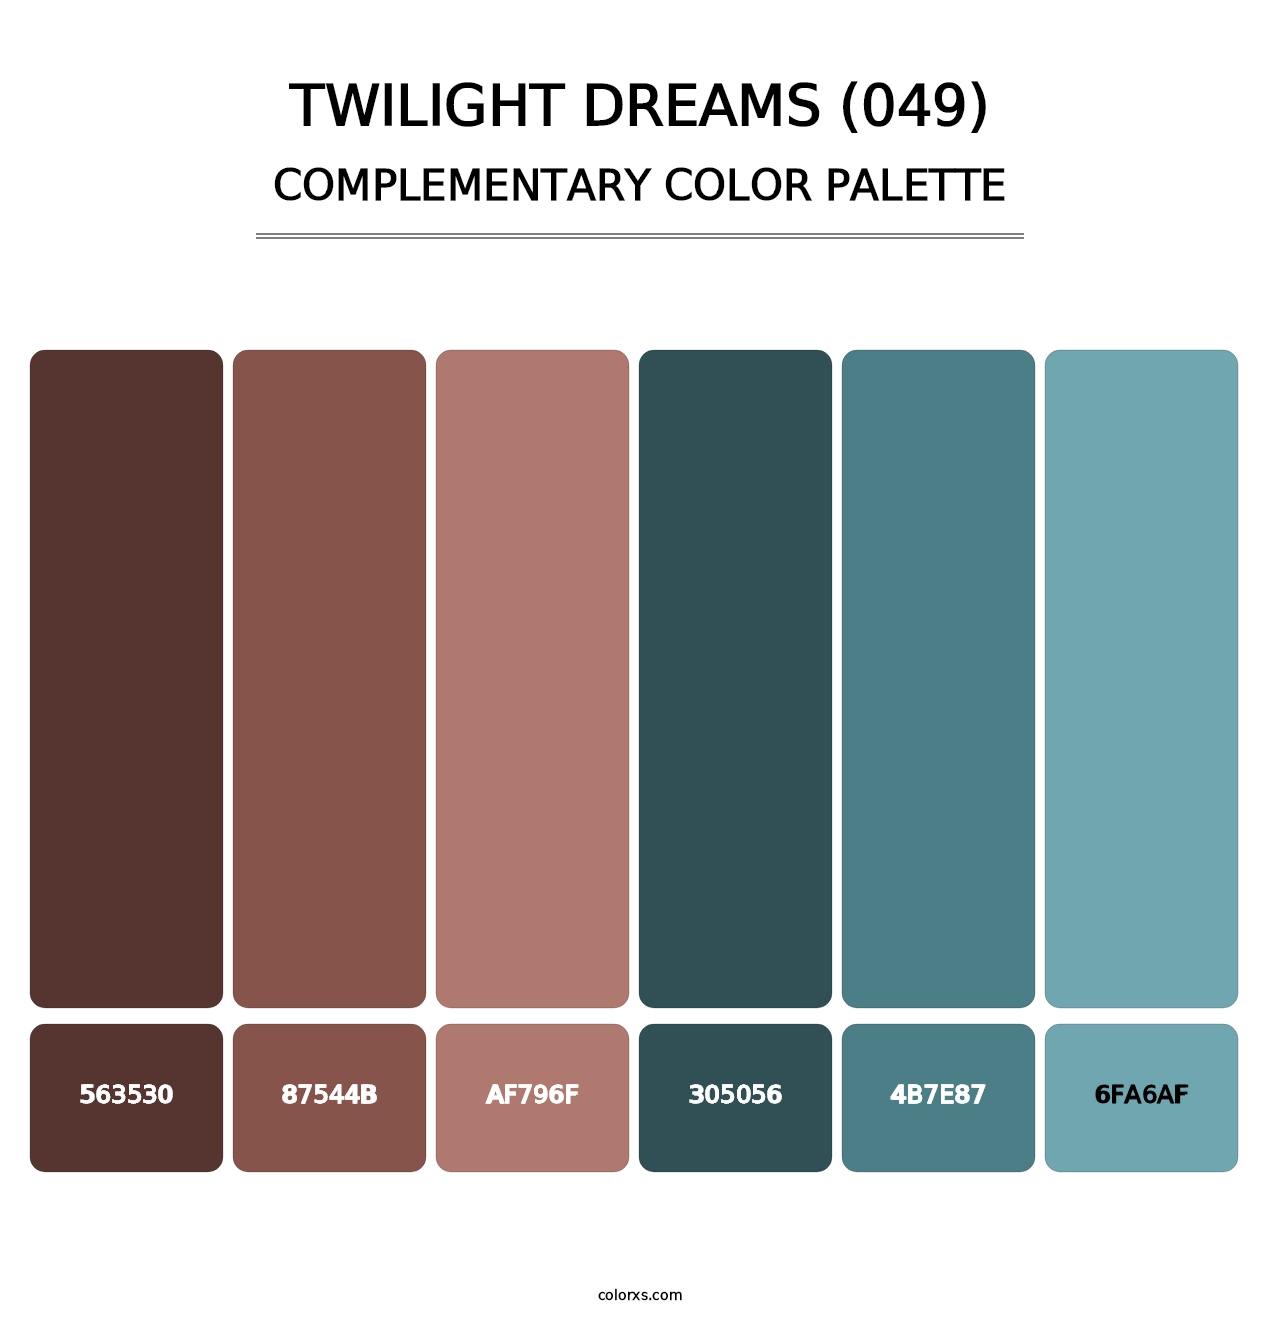 Twilight Dreams (049) - Complementary Color Palette